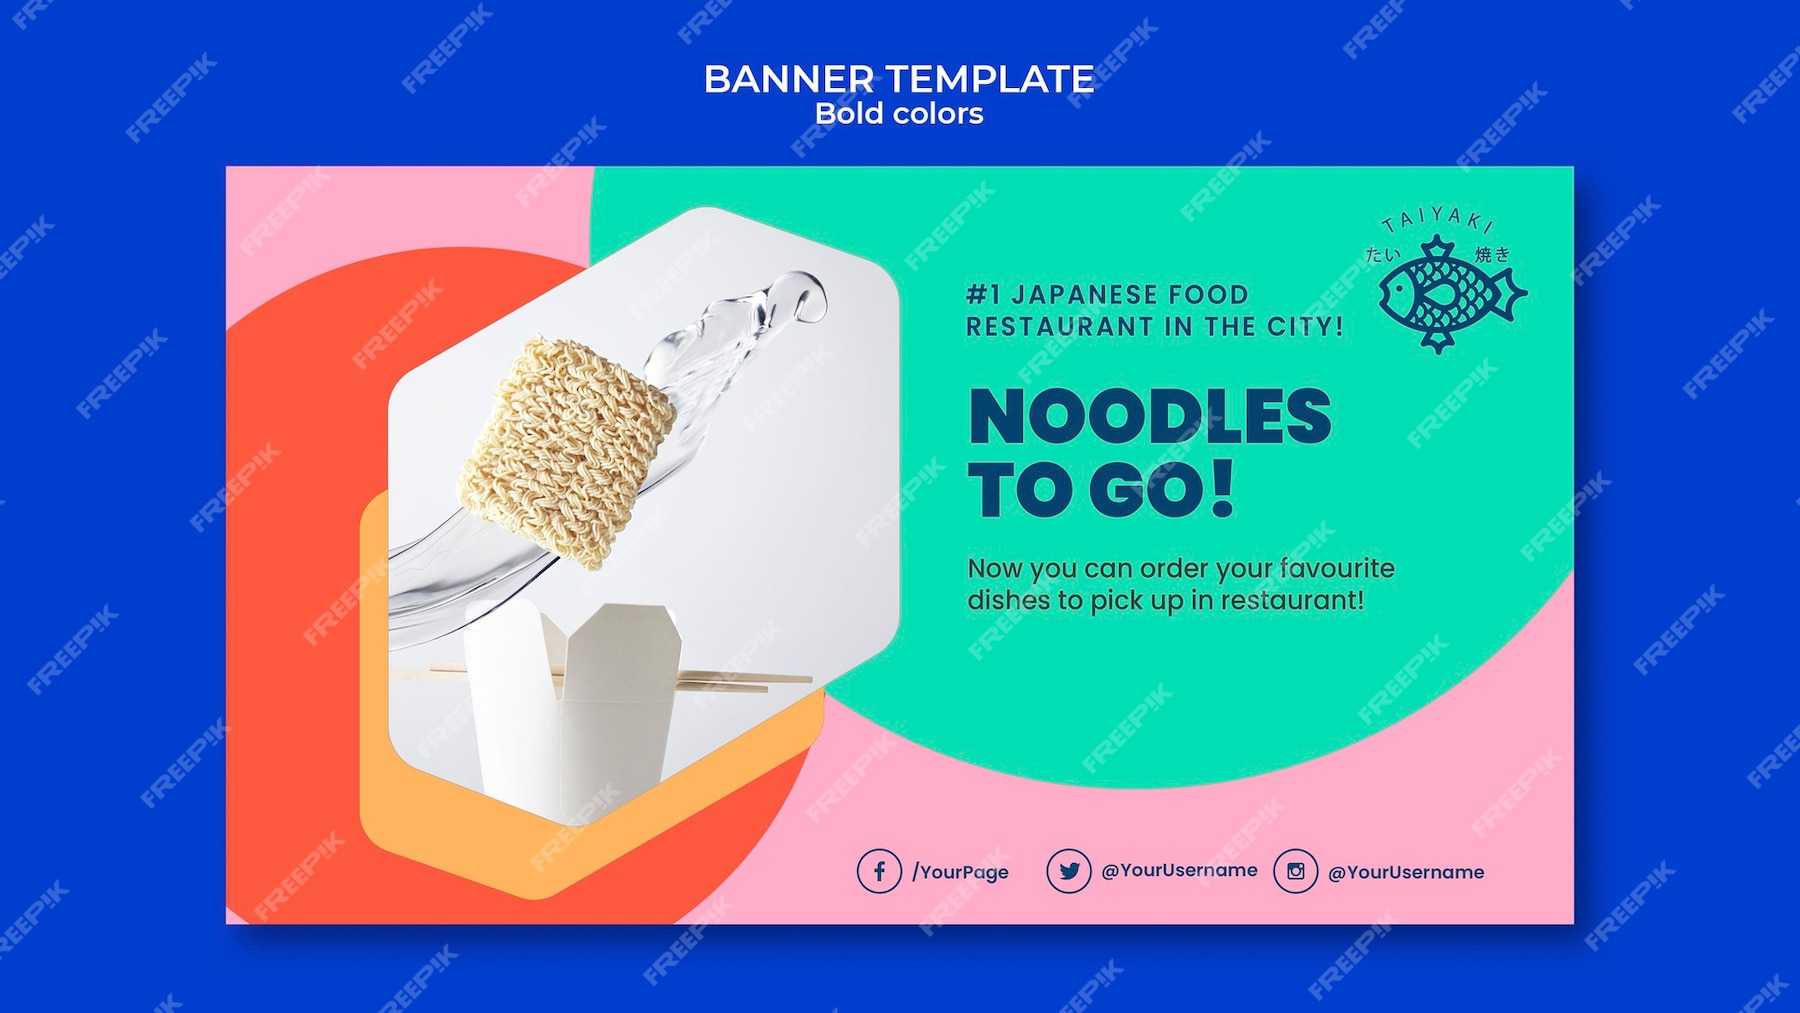 Free PSD | Bold colors noodles banner template